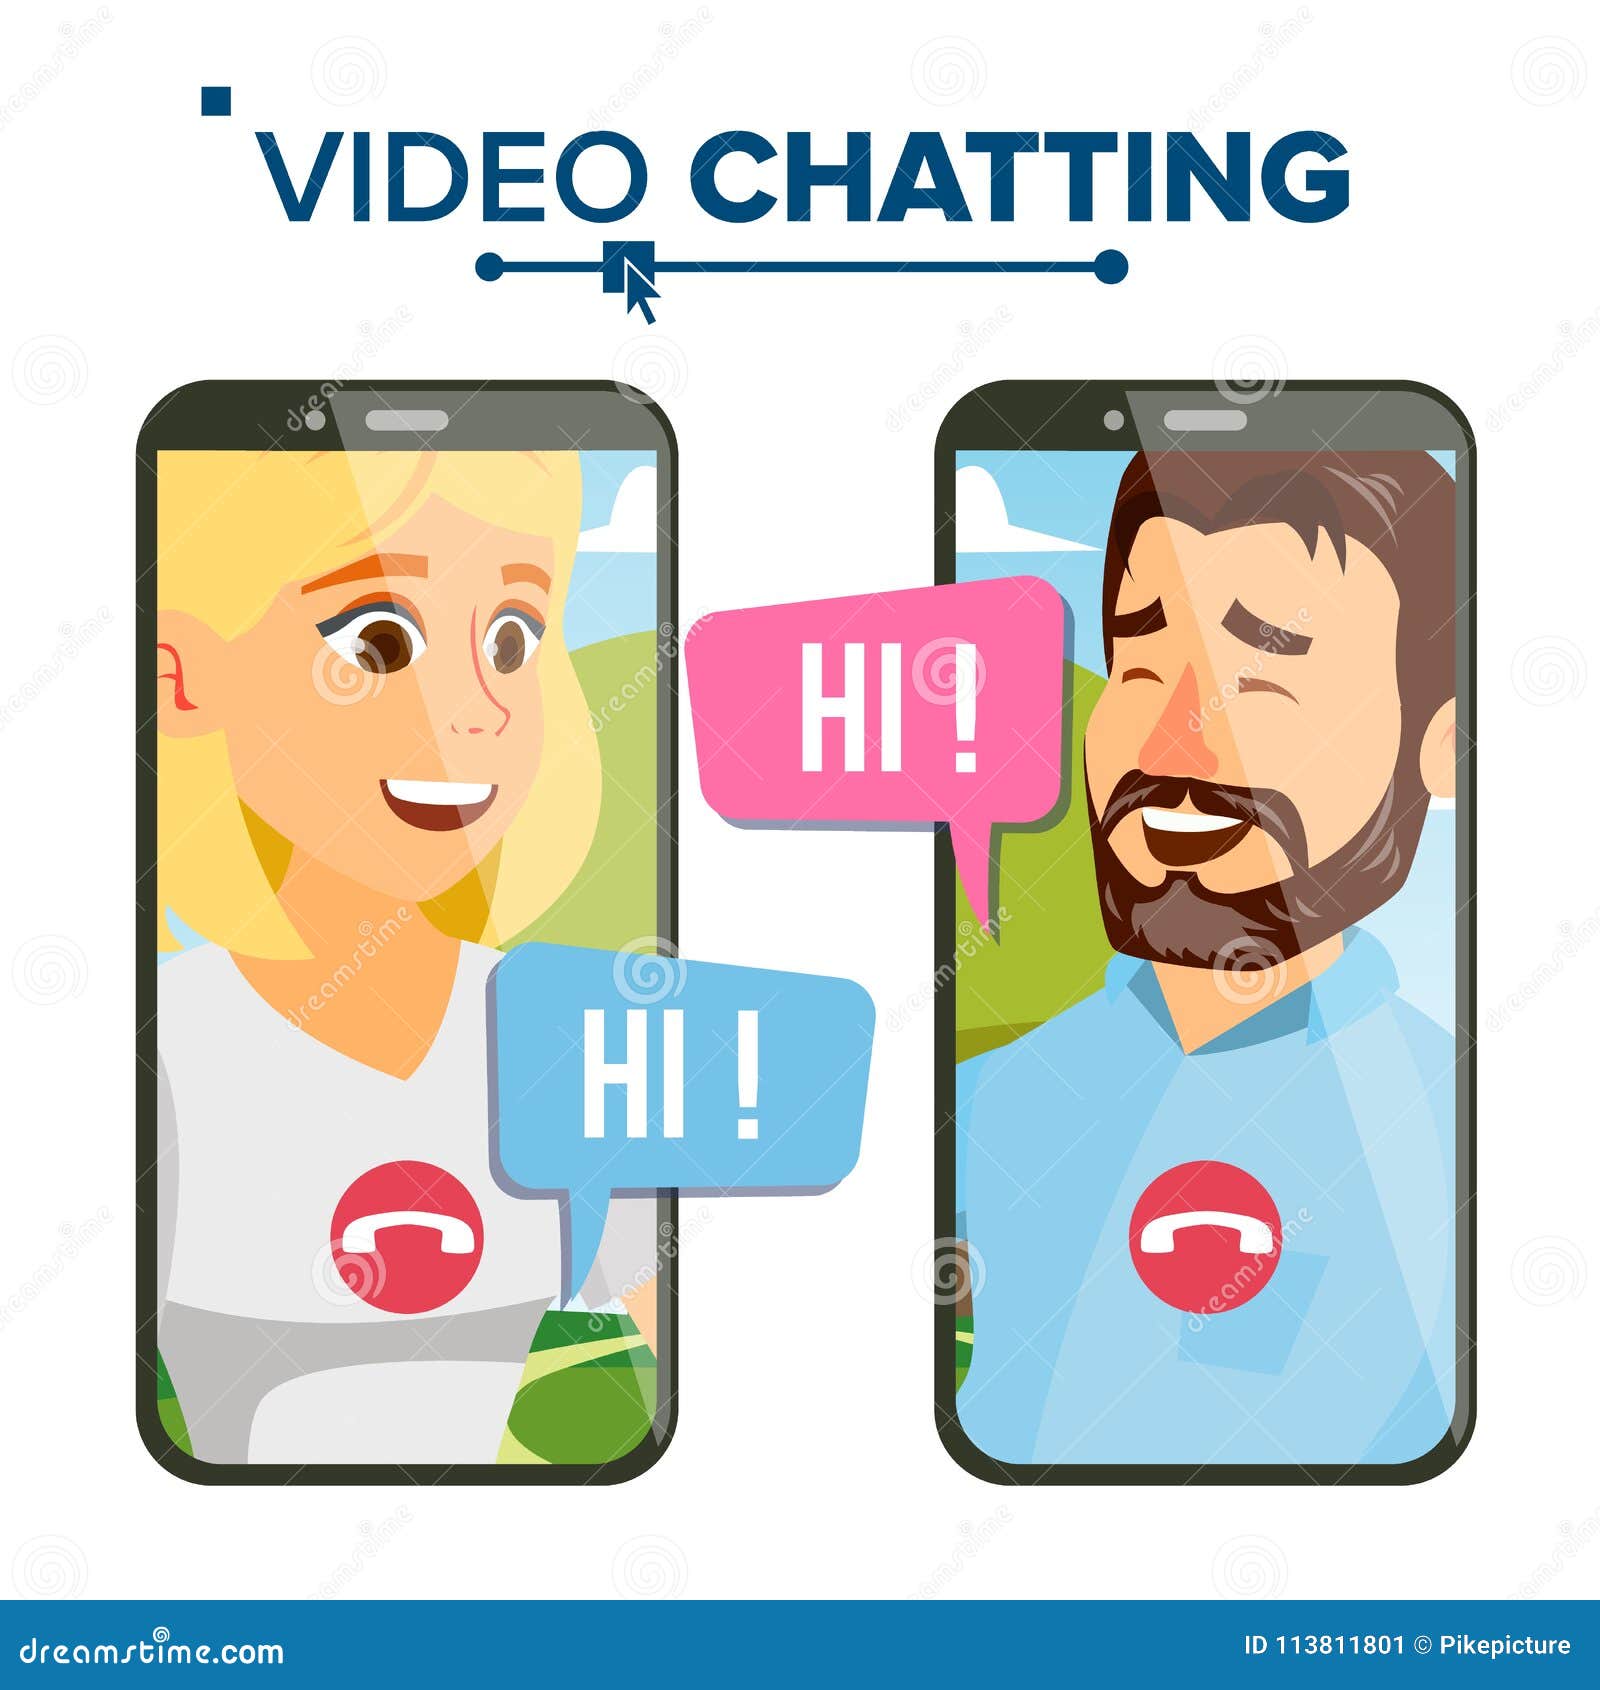 Chatting Vector. Speech Icon. Network Discussion. Smartphone. Isolated Flat  Cartoon Illustration Stock Vector - Illustration of graphic, hand: 113811801